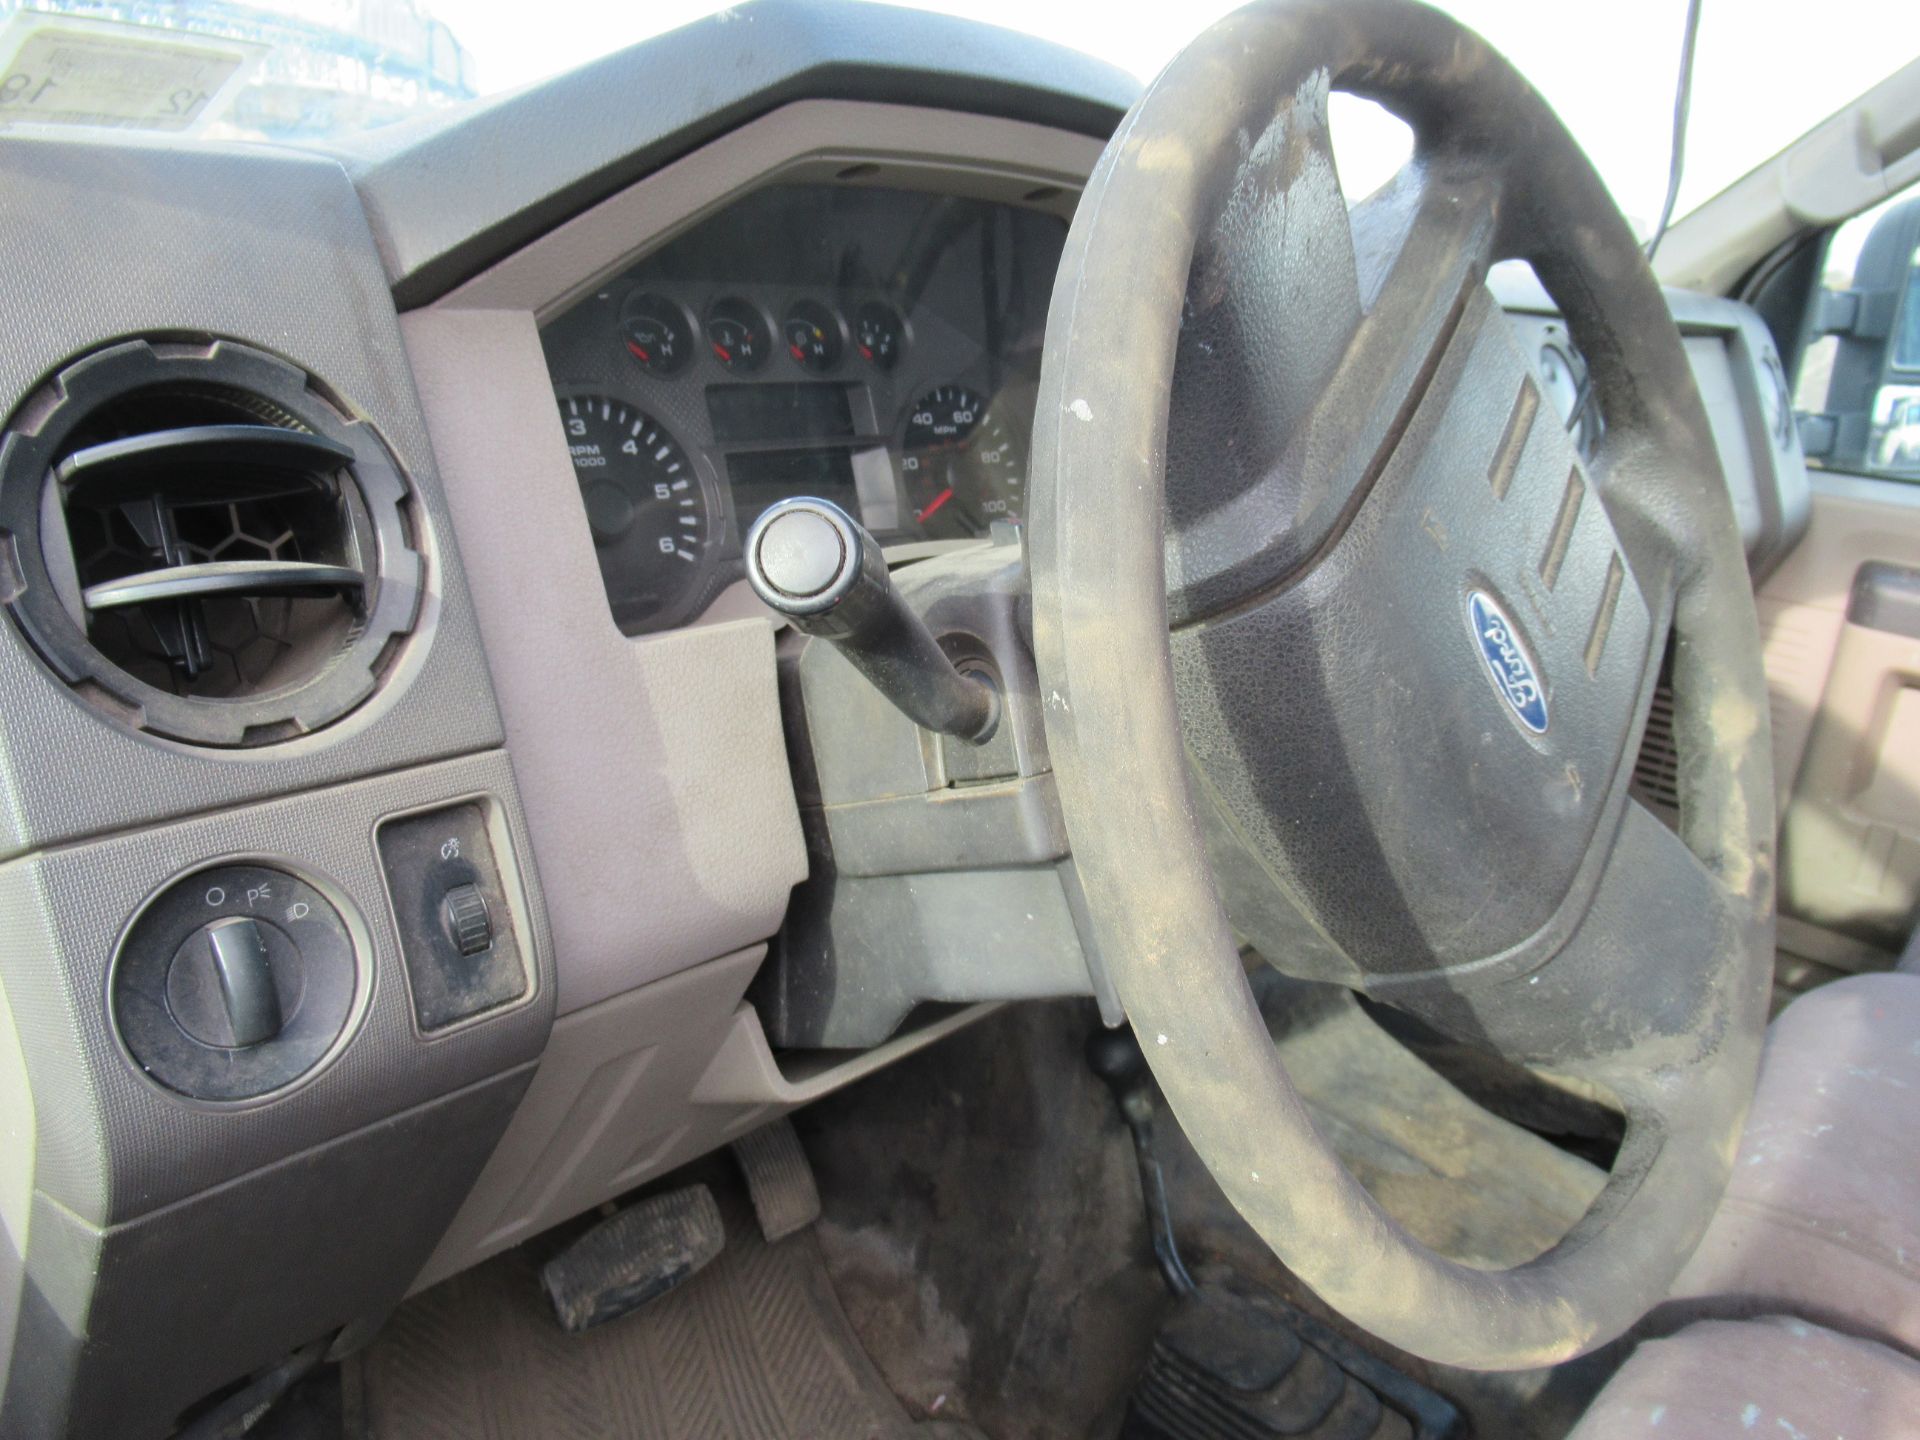 2009 FORD F-250 XL SUPER DUTY UTILITY TRUCK, 4-DOOR, 4-WHEEL DRIVE, CLOTH SEATS, APPROXIMATELY 116, - Image 12 of 18